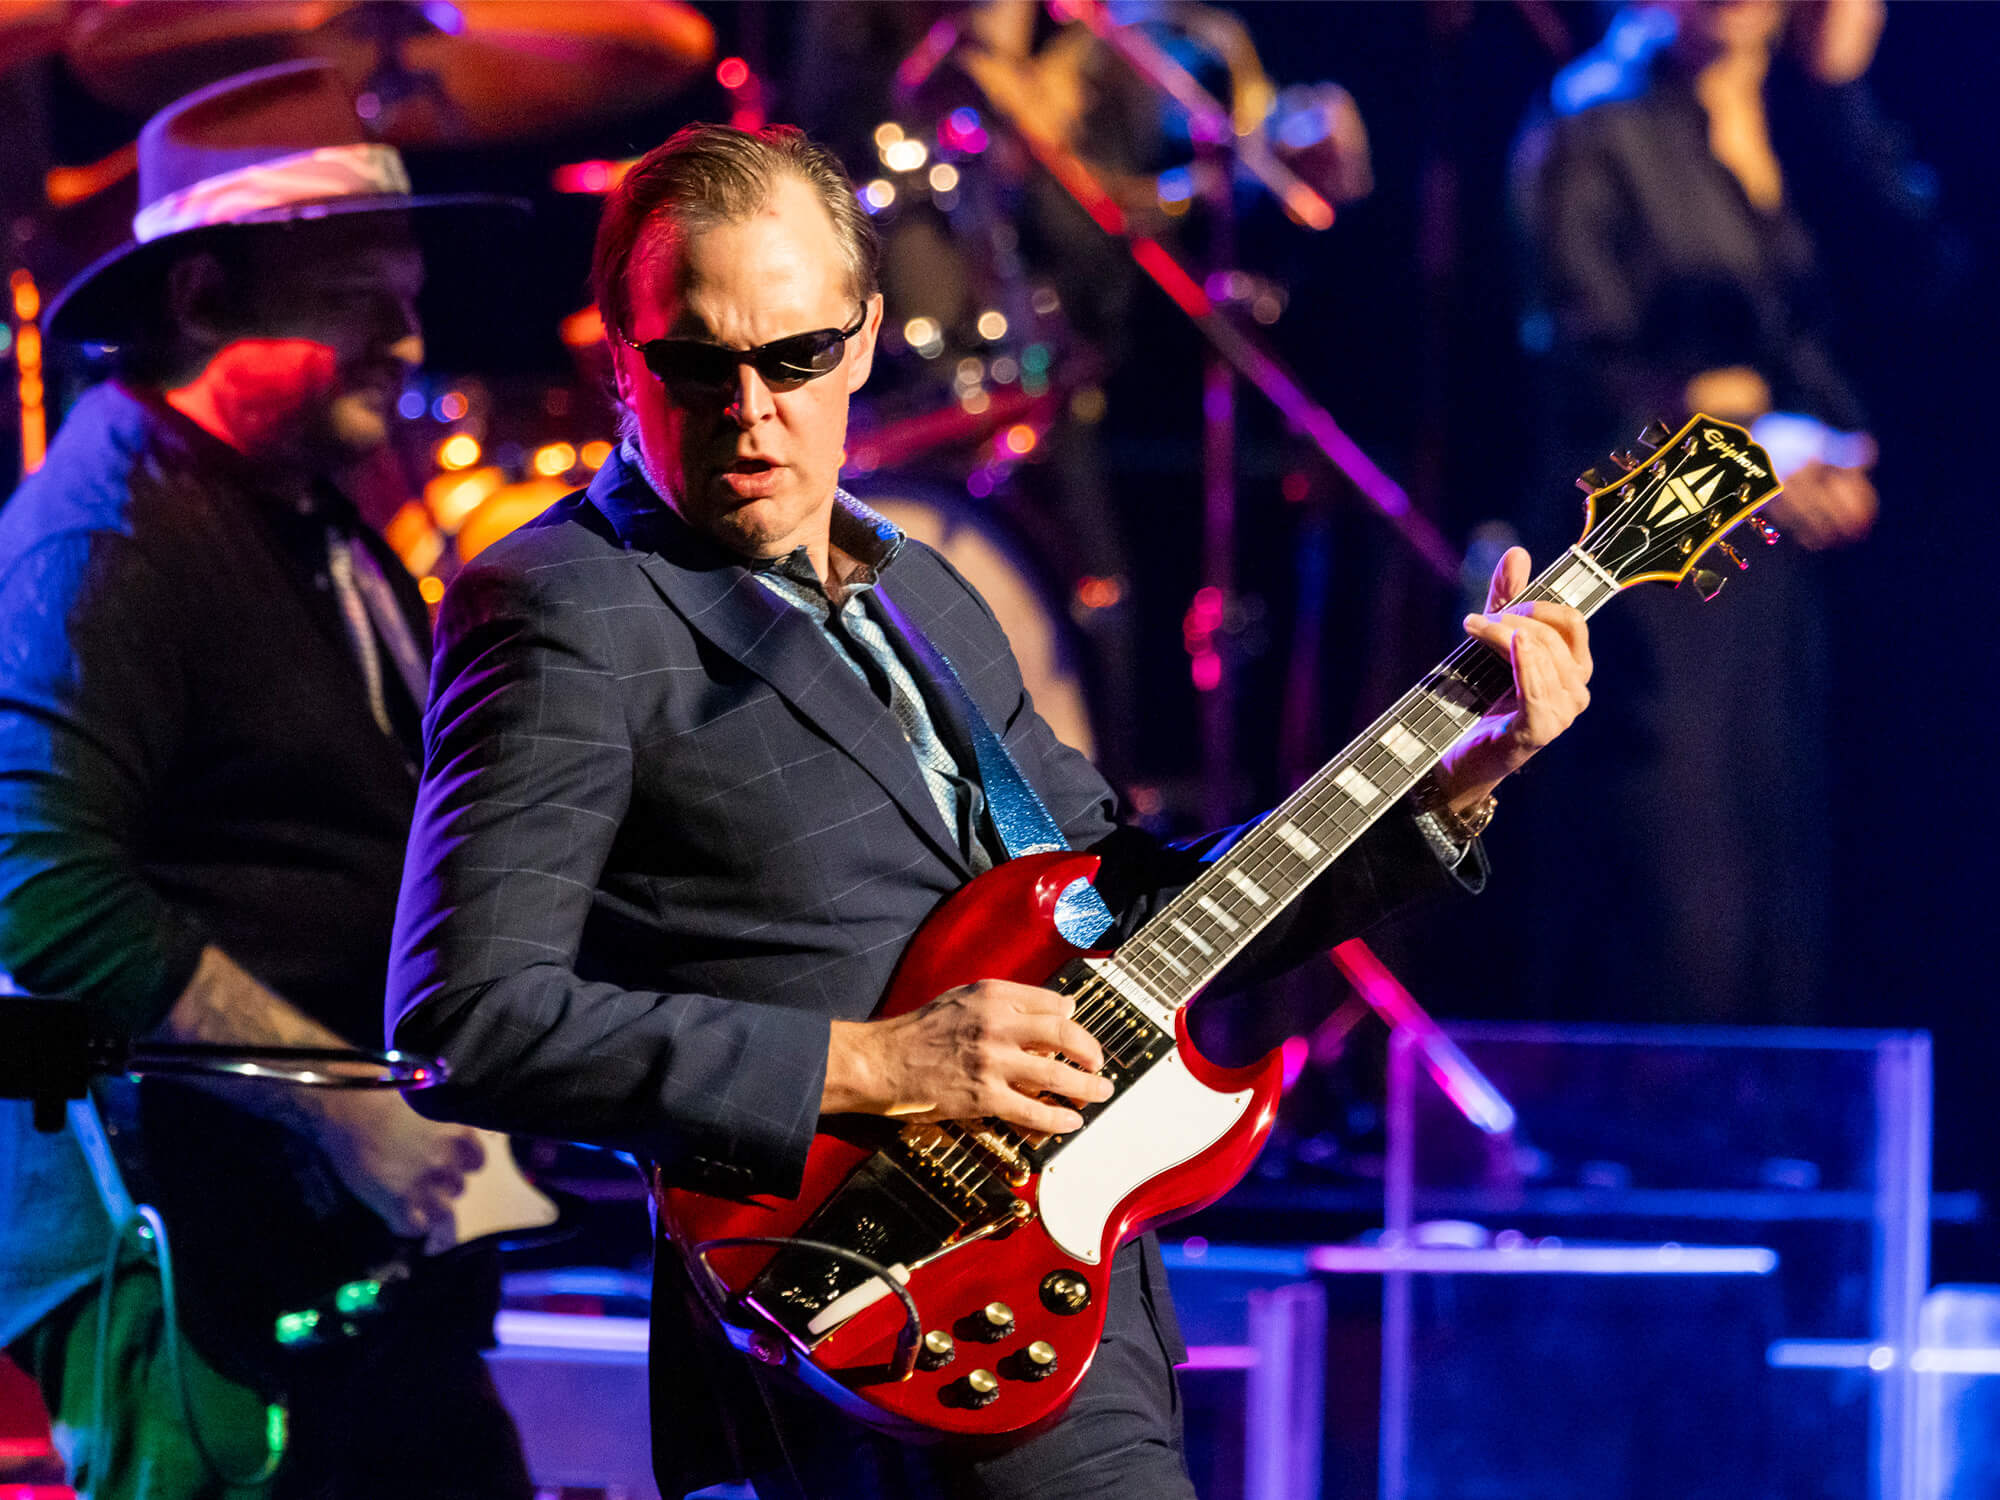 Joe Bonamassa on stage playing an SG. He is wearing a suit and sunglasses.